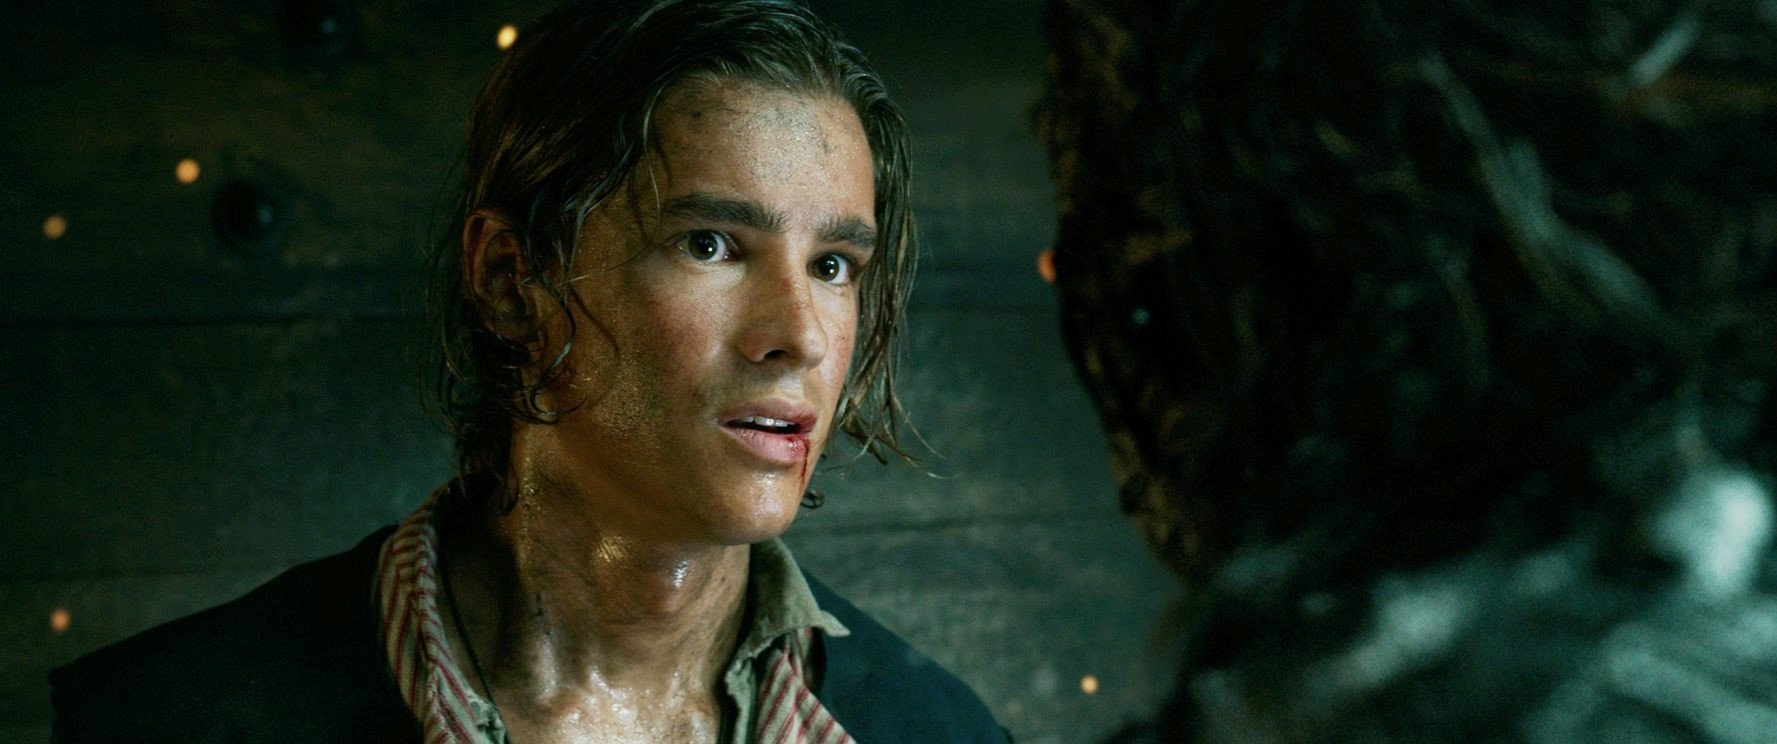 Brenton Thwaites stars as Henry in Walt Disney Pictures' Pirates of the Caribbean: Dead Men Tell No Tales (2017)